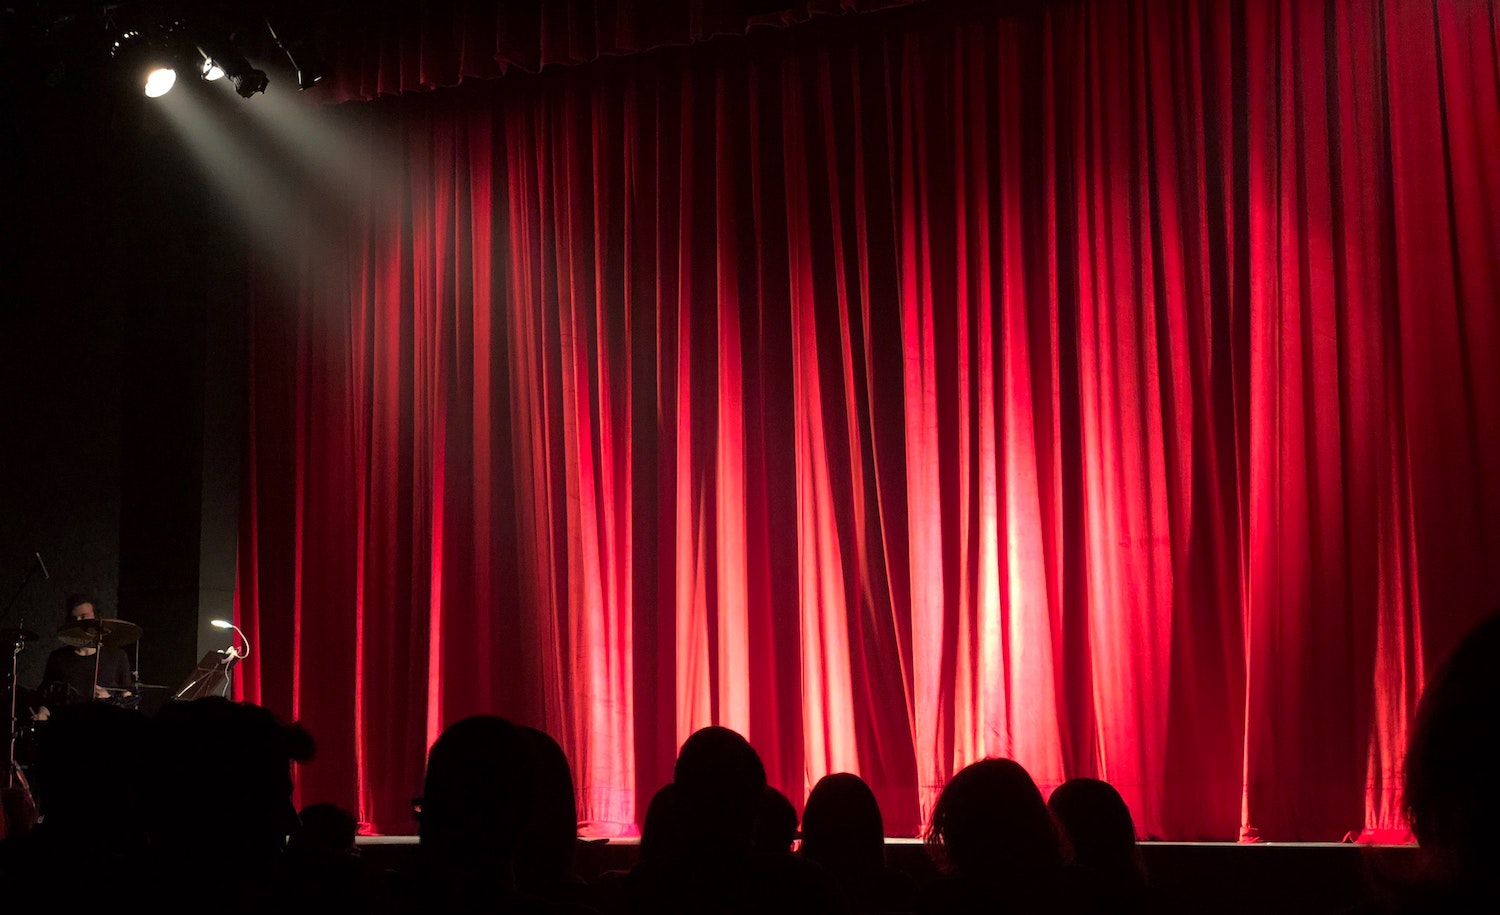 a stage represents an introvert actor overcoming shyness